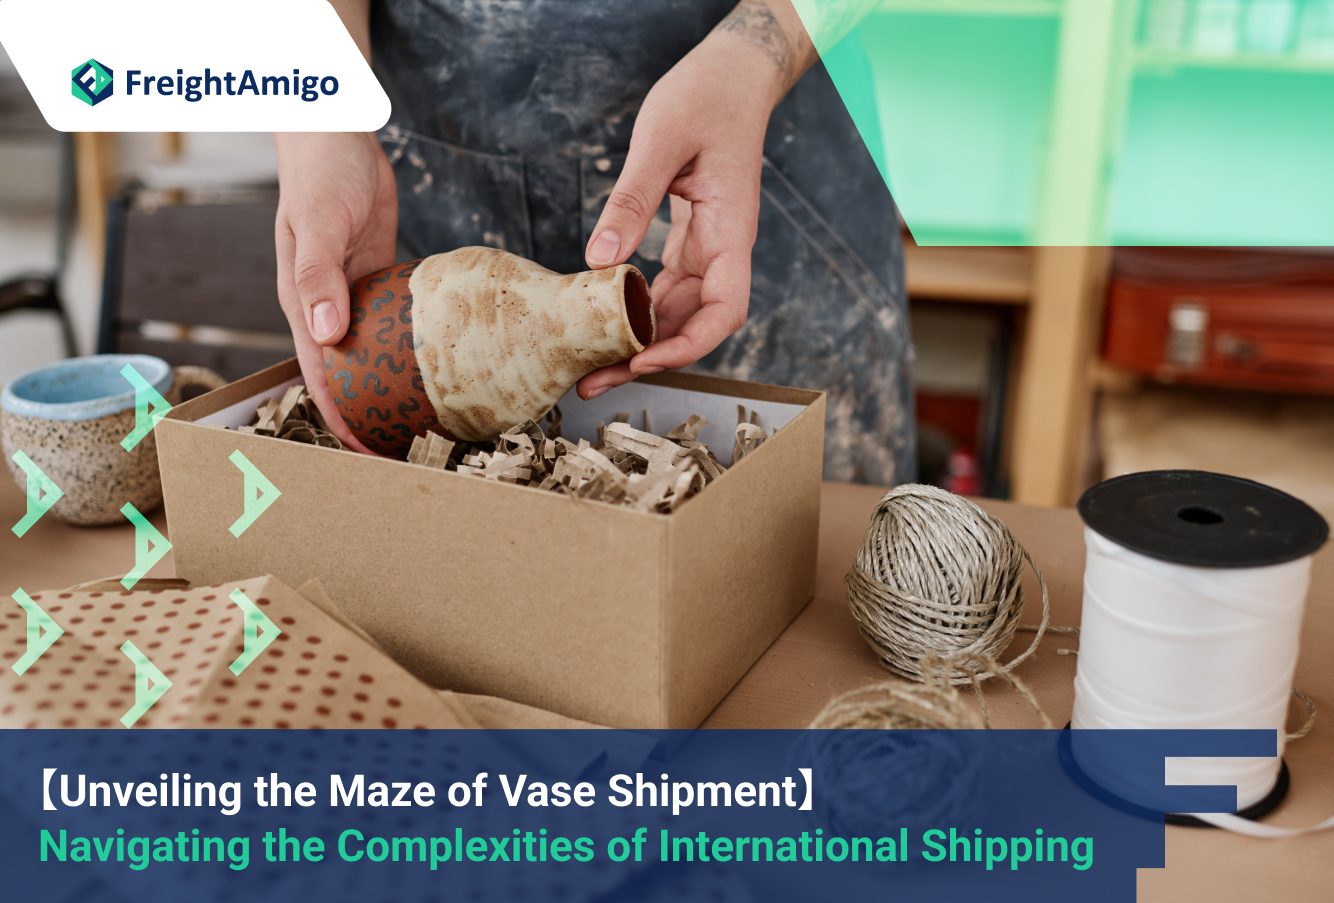 【Unveiling the Maze of Vase Shipment】 Navigating the Complexities of International Shipping